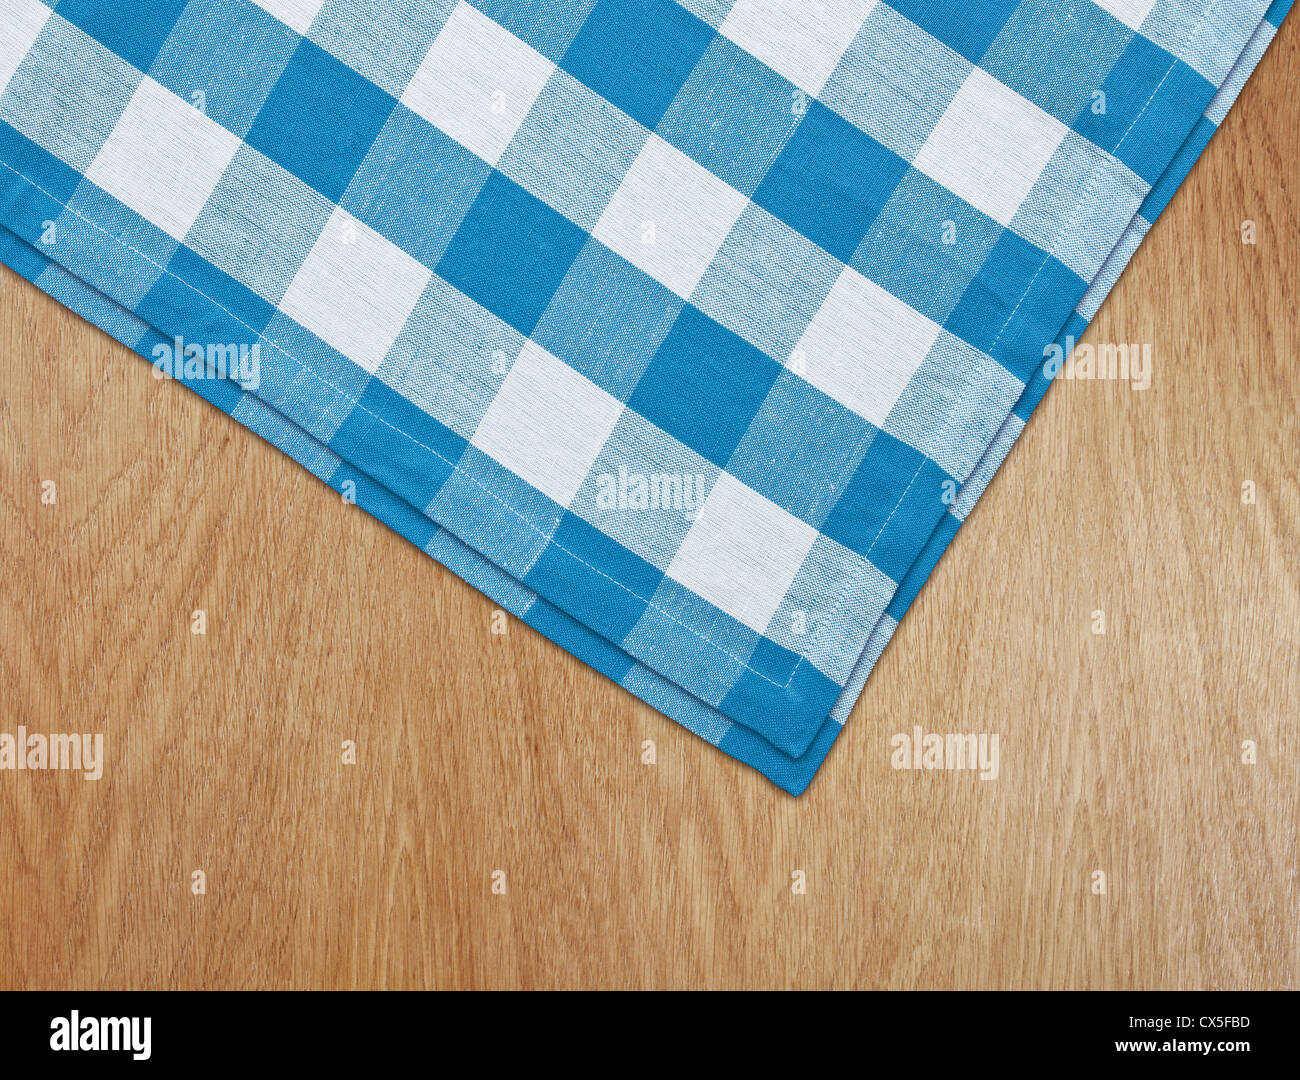 wooden kitchen table with blue gingham tablecloth Stock Photo